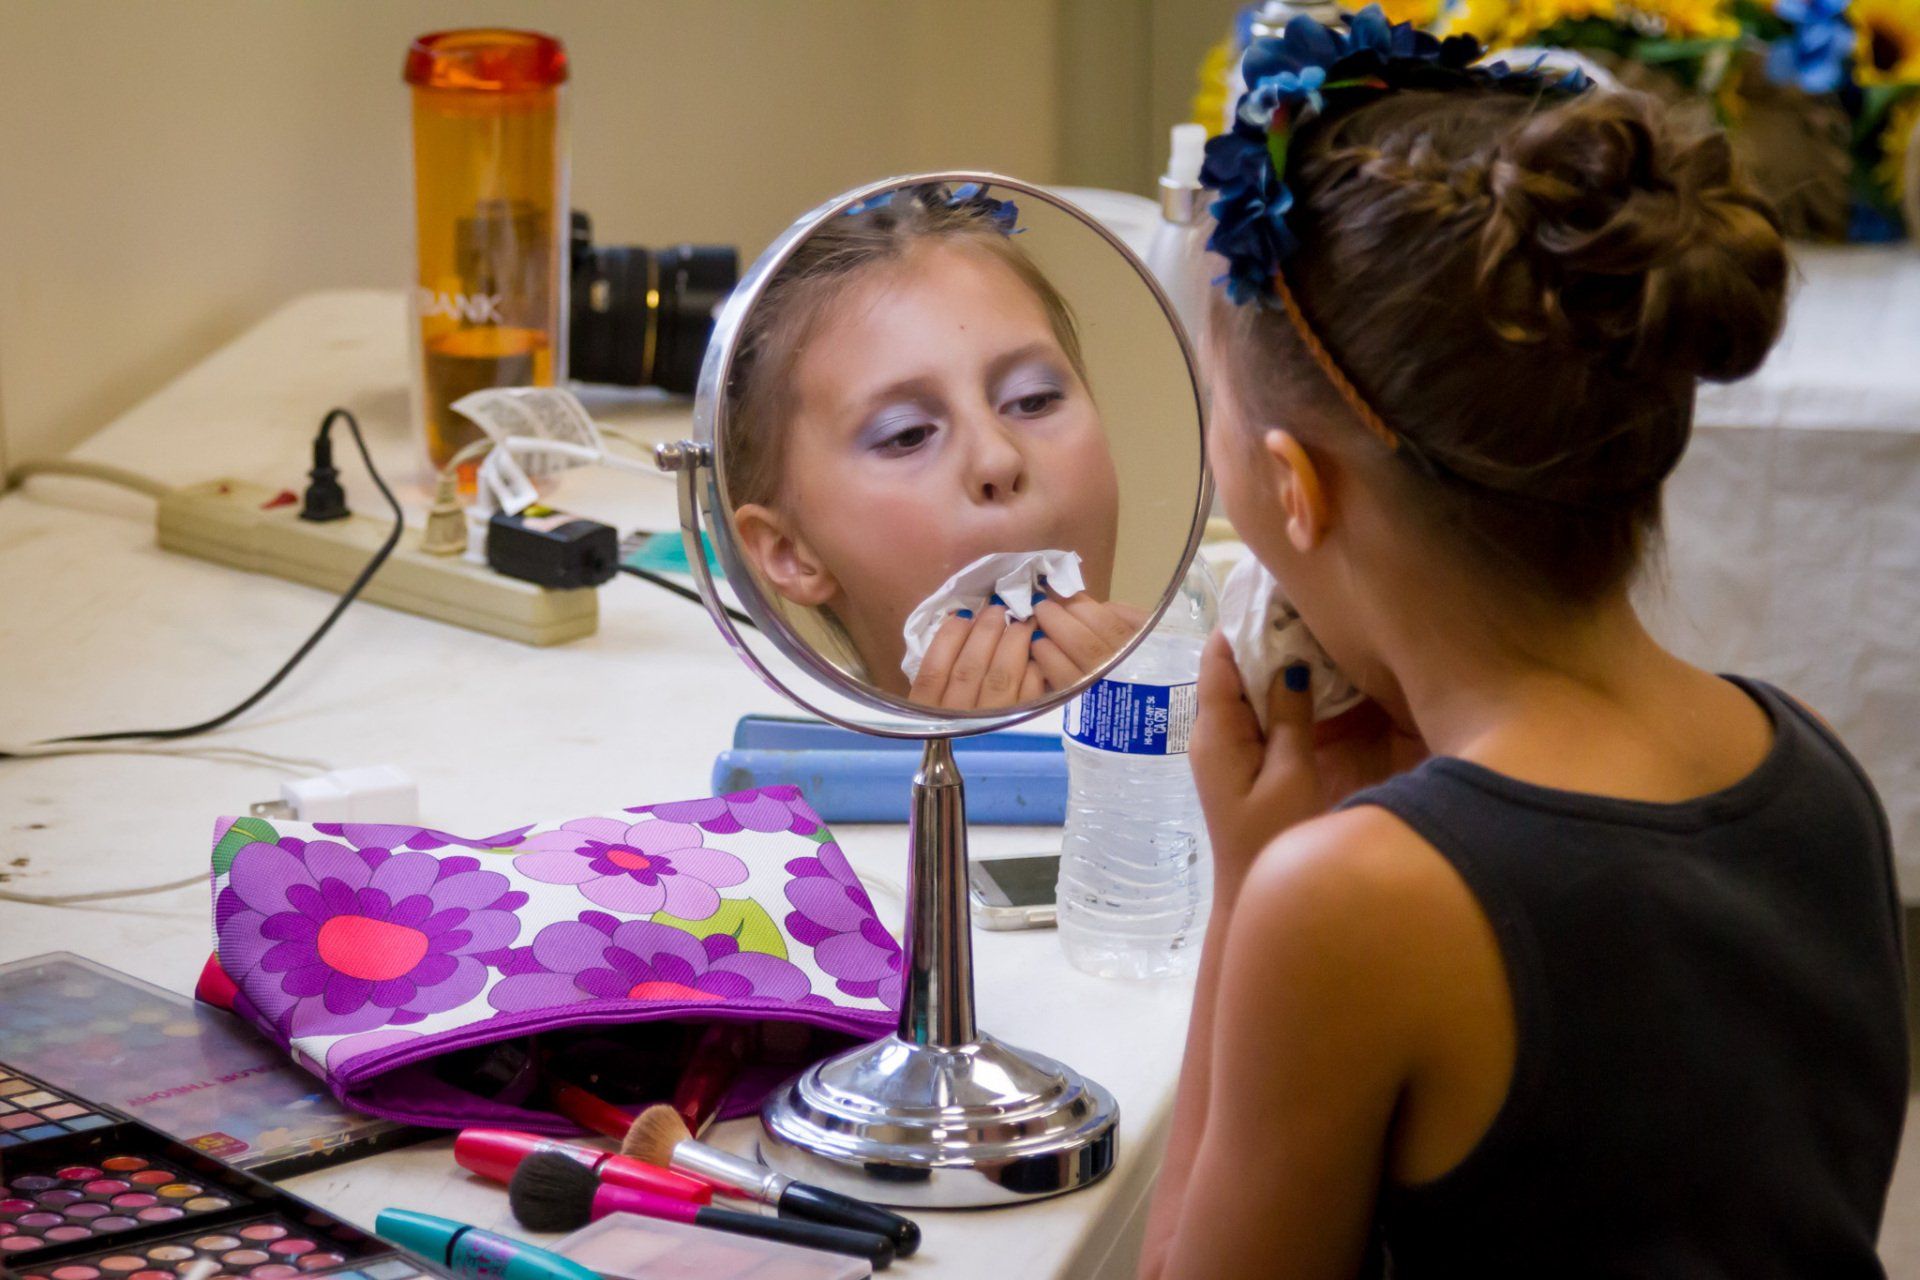 A portrait of the flower girl looking at herself in the mirror as she gets ready